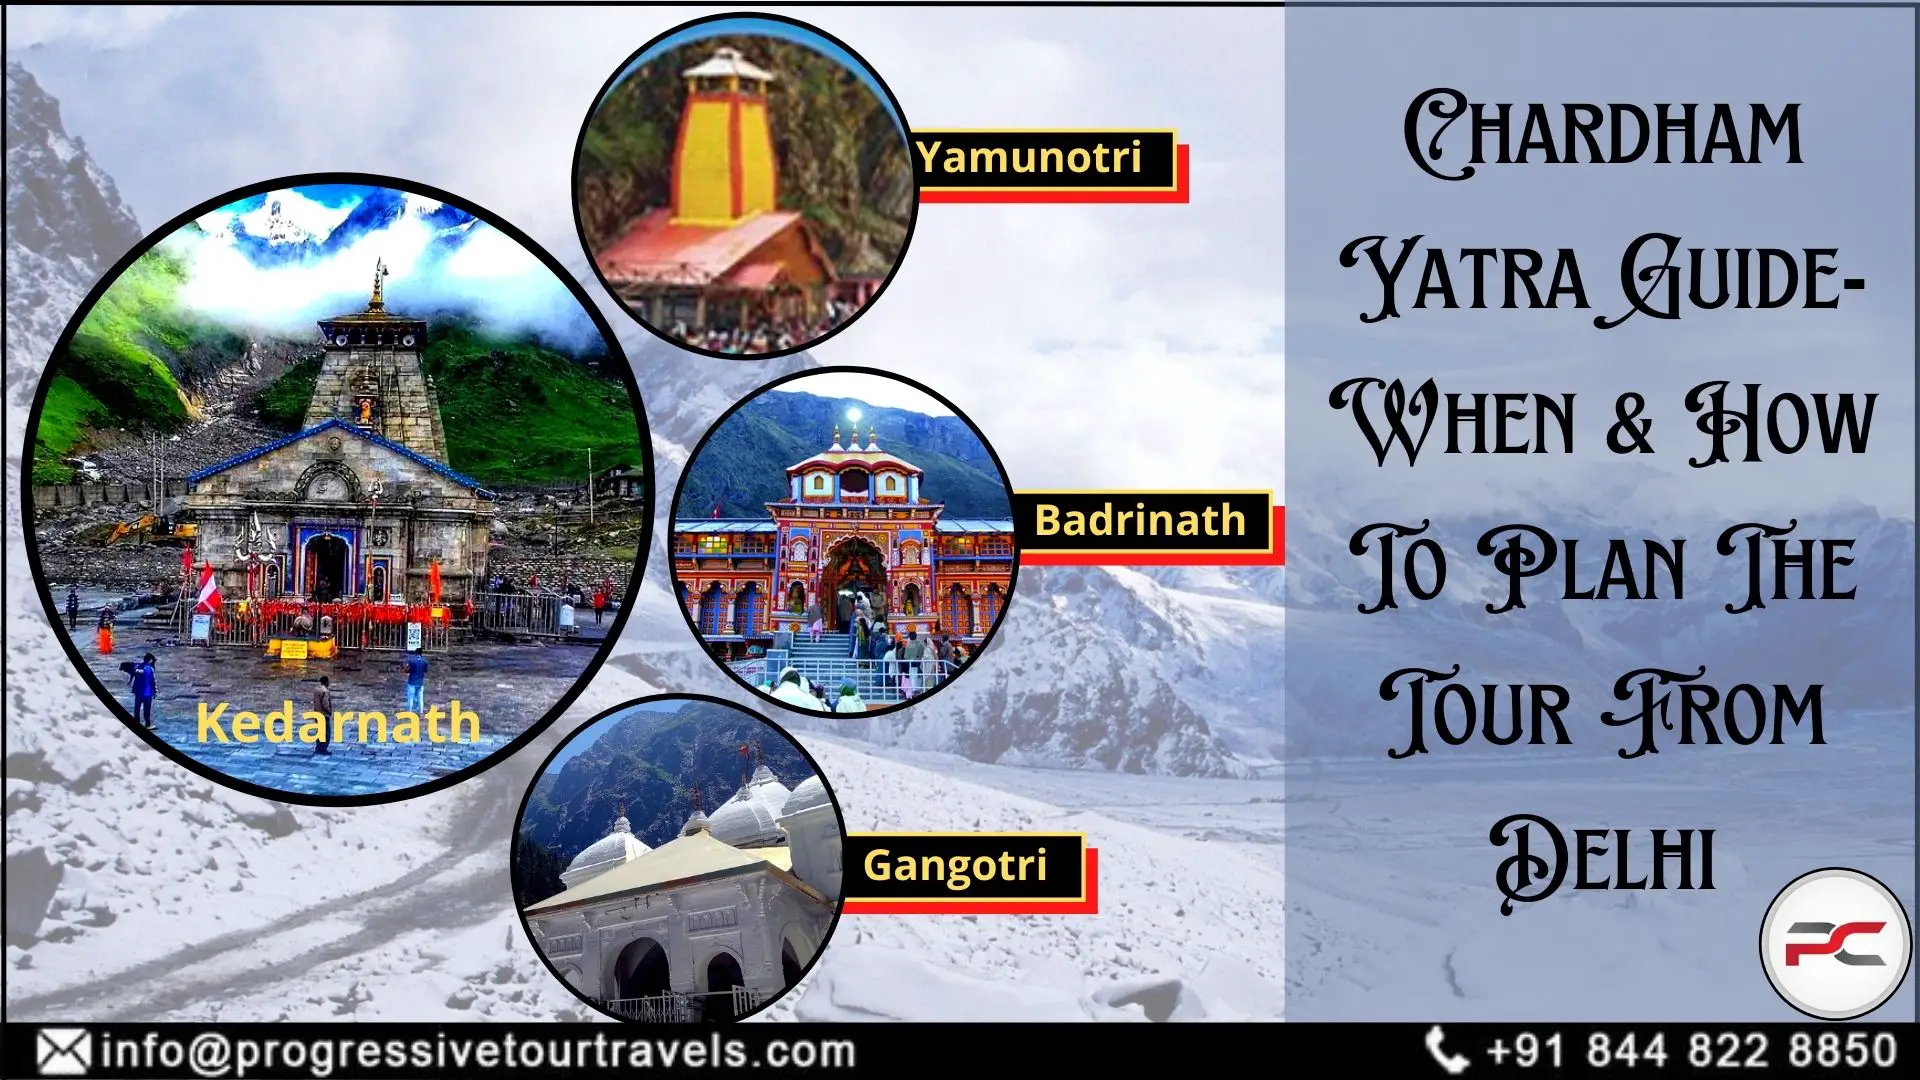 Chardham Yatra Guide-When & How To Plan The Tour From Delhi-1ed09a6f